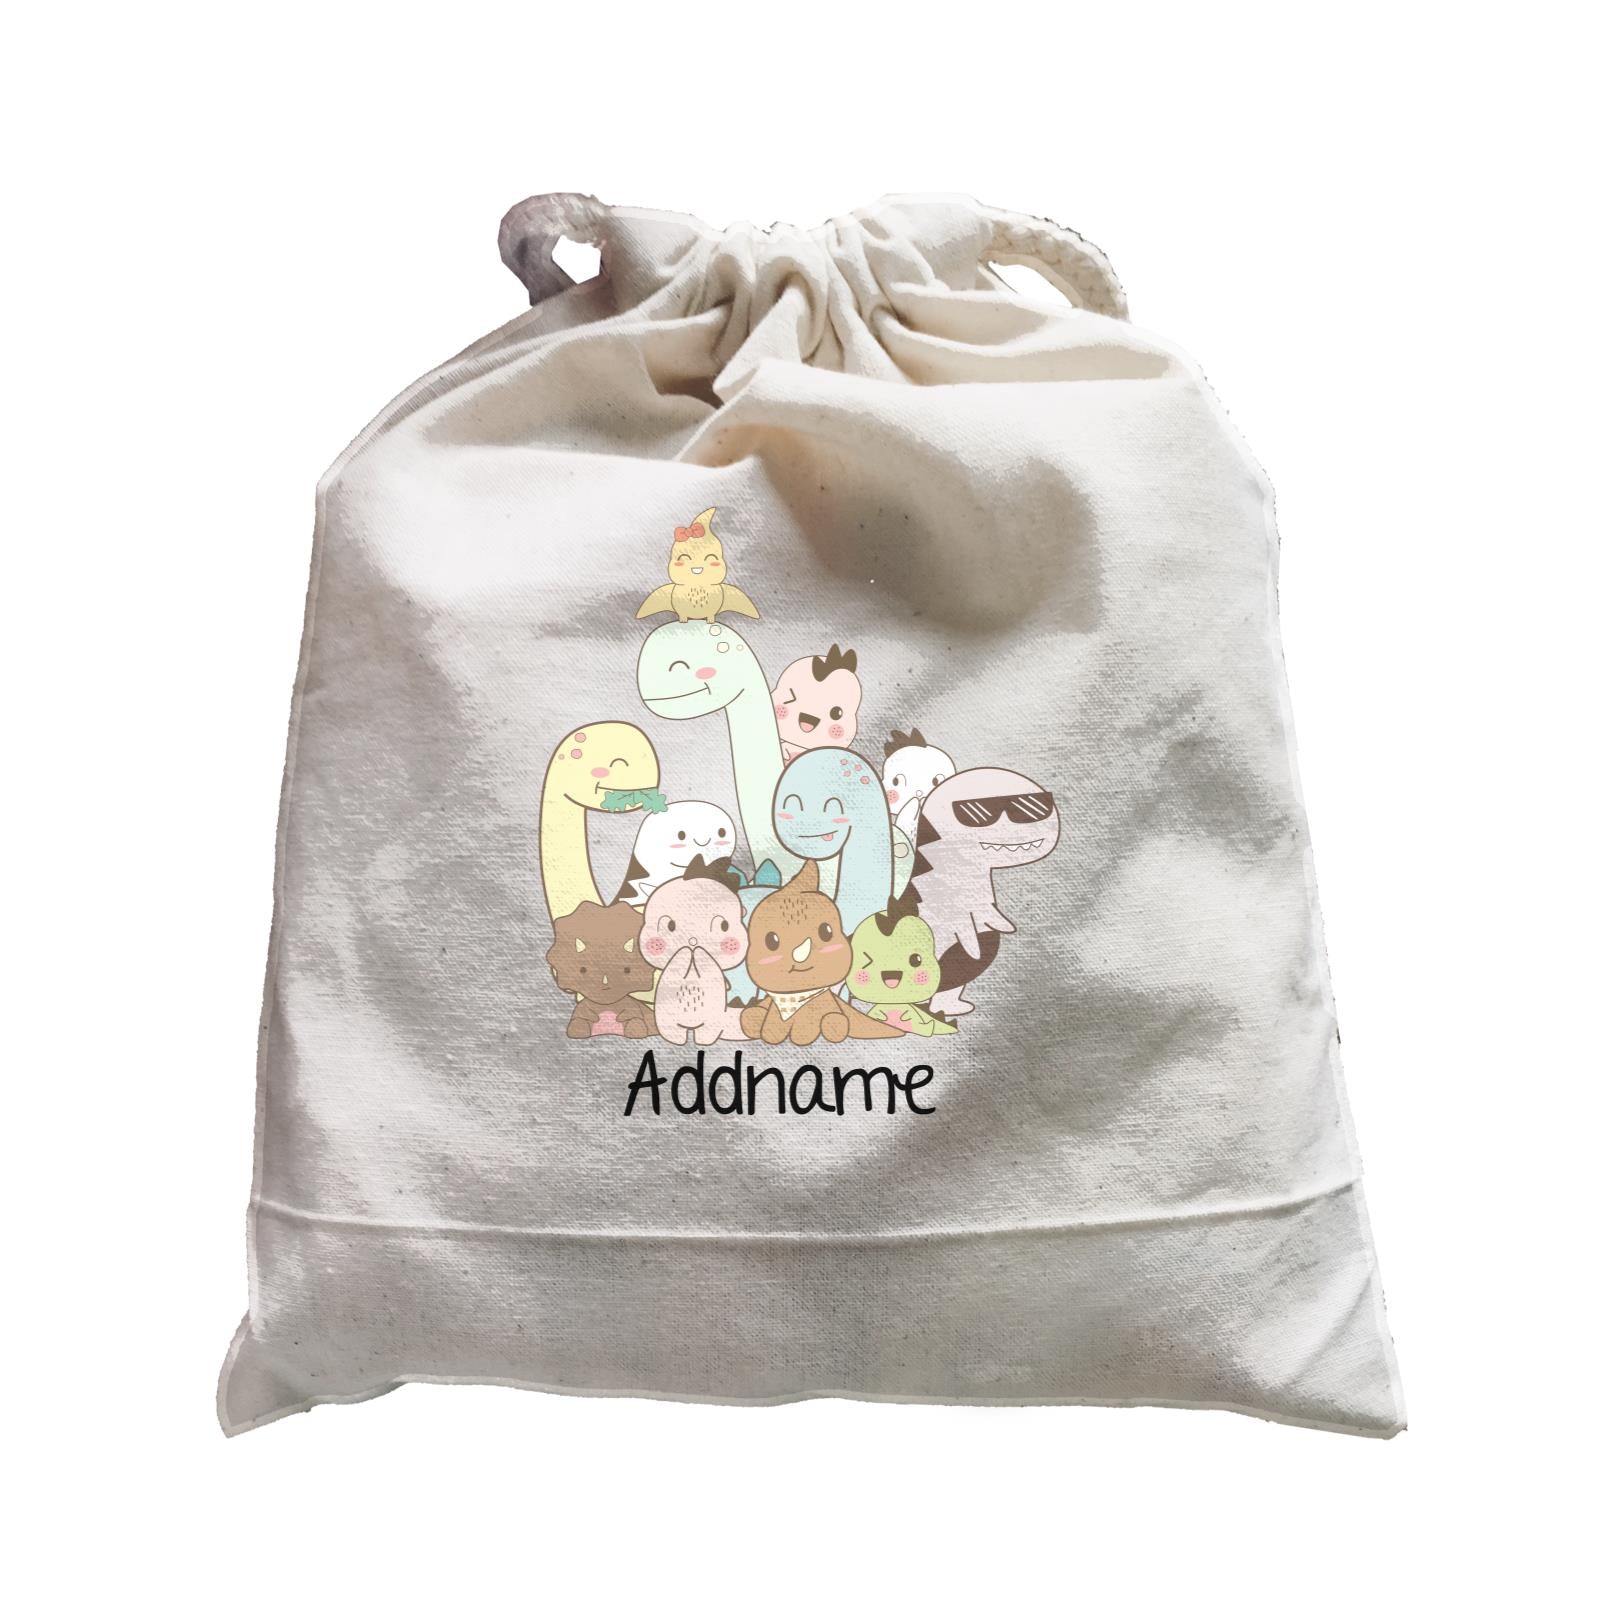 Cute Animals And Friends Series Cute Little Dinosaur Group Addname Satchel